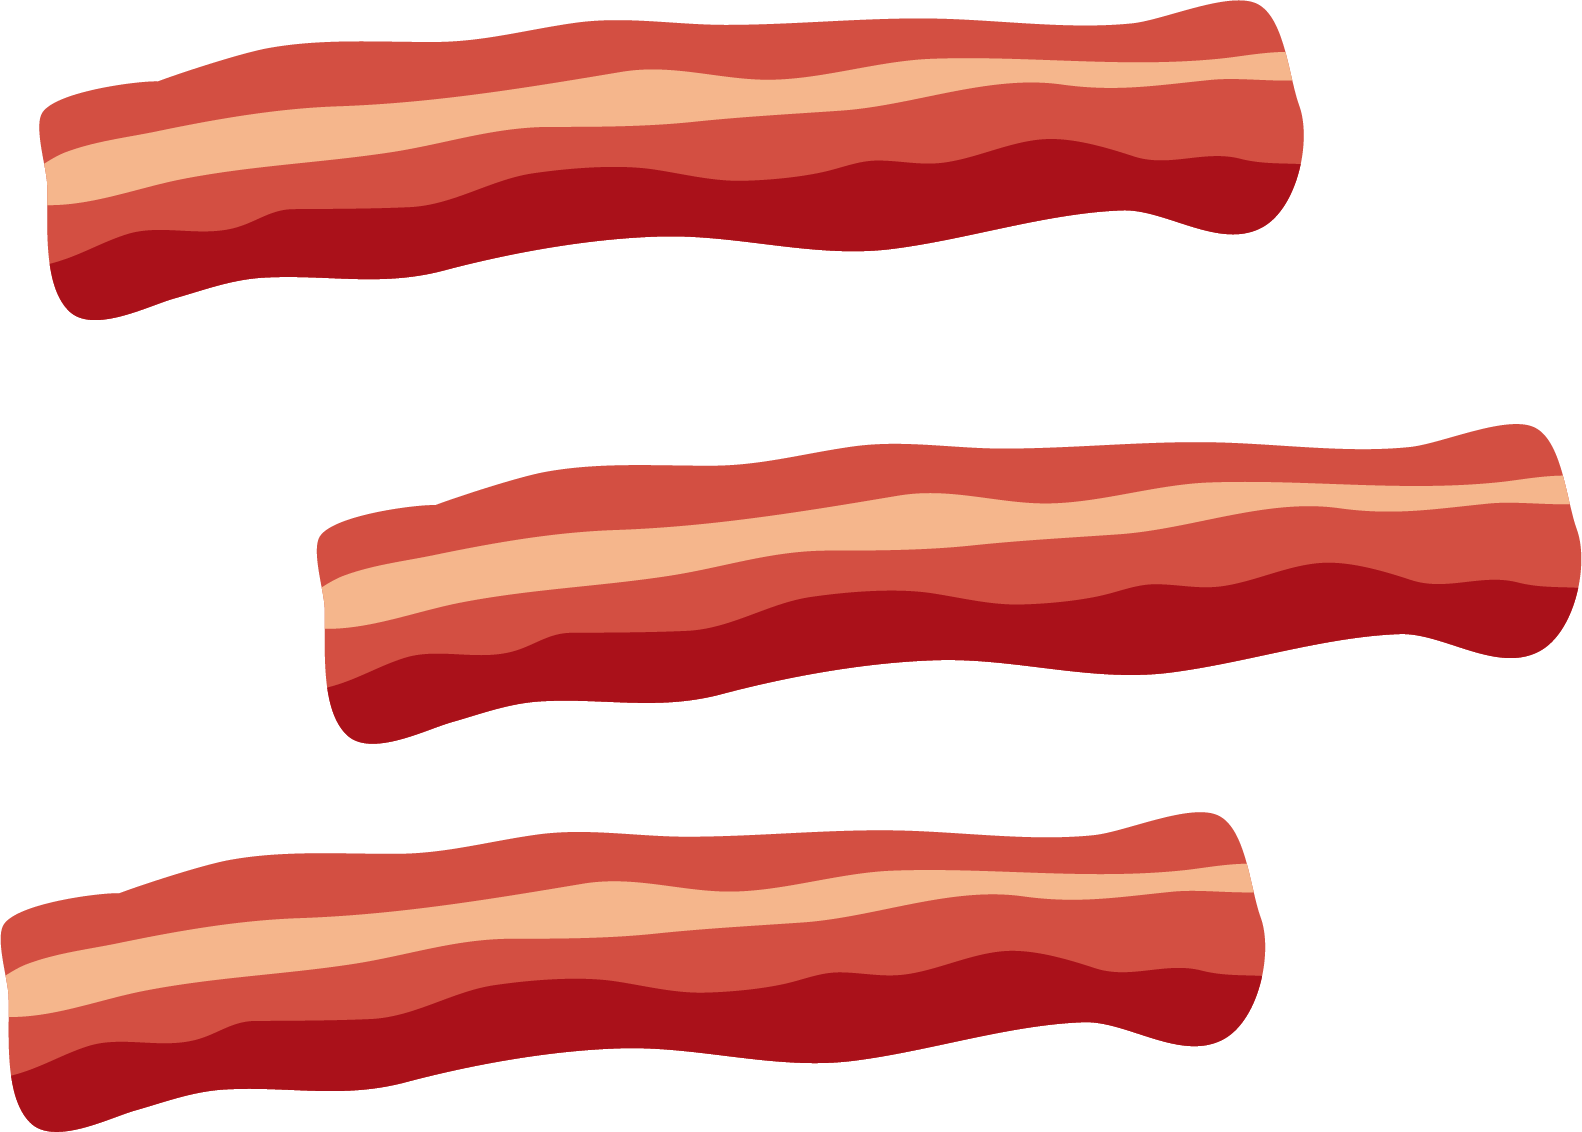 Sizzling Bacon Strips Illustration PNG image